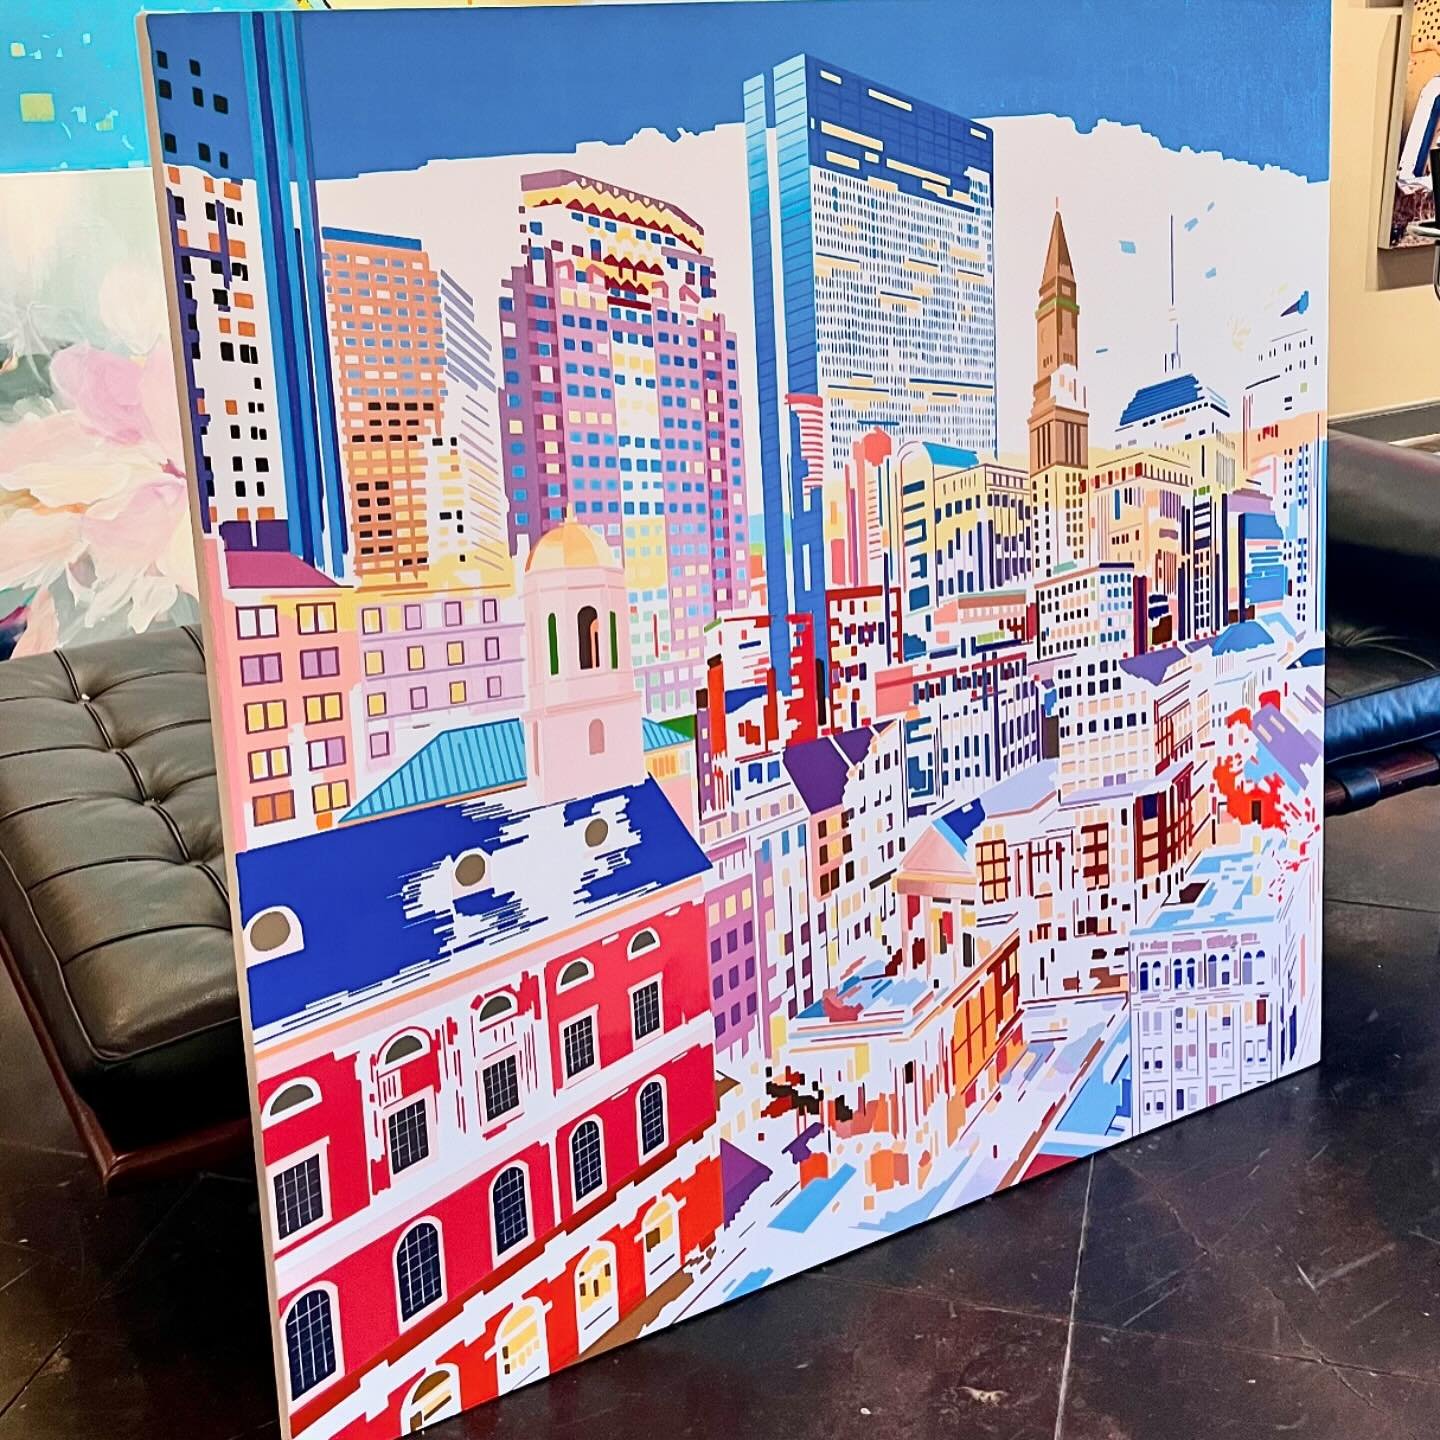 New Boston painting available @julesplacegallery 

&ldquo;Figment&rdquo; Oil on Canvas, 48&rdquo; x 48&rdquo; 2024
.
.
.
.
#benschwab #oilpainting #oiloncanvas #largescalepainting #urbanlandscapepainting #cityscapepainting #cityscapes #abstractcitysc